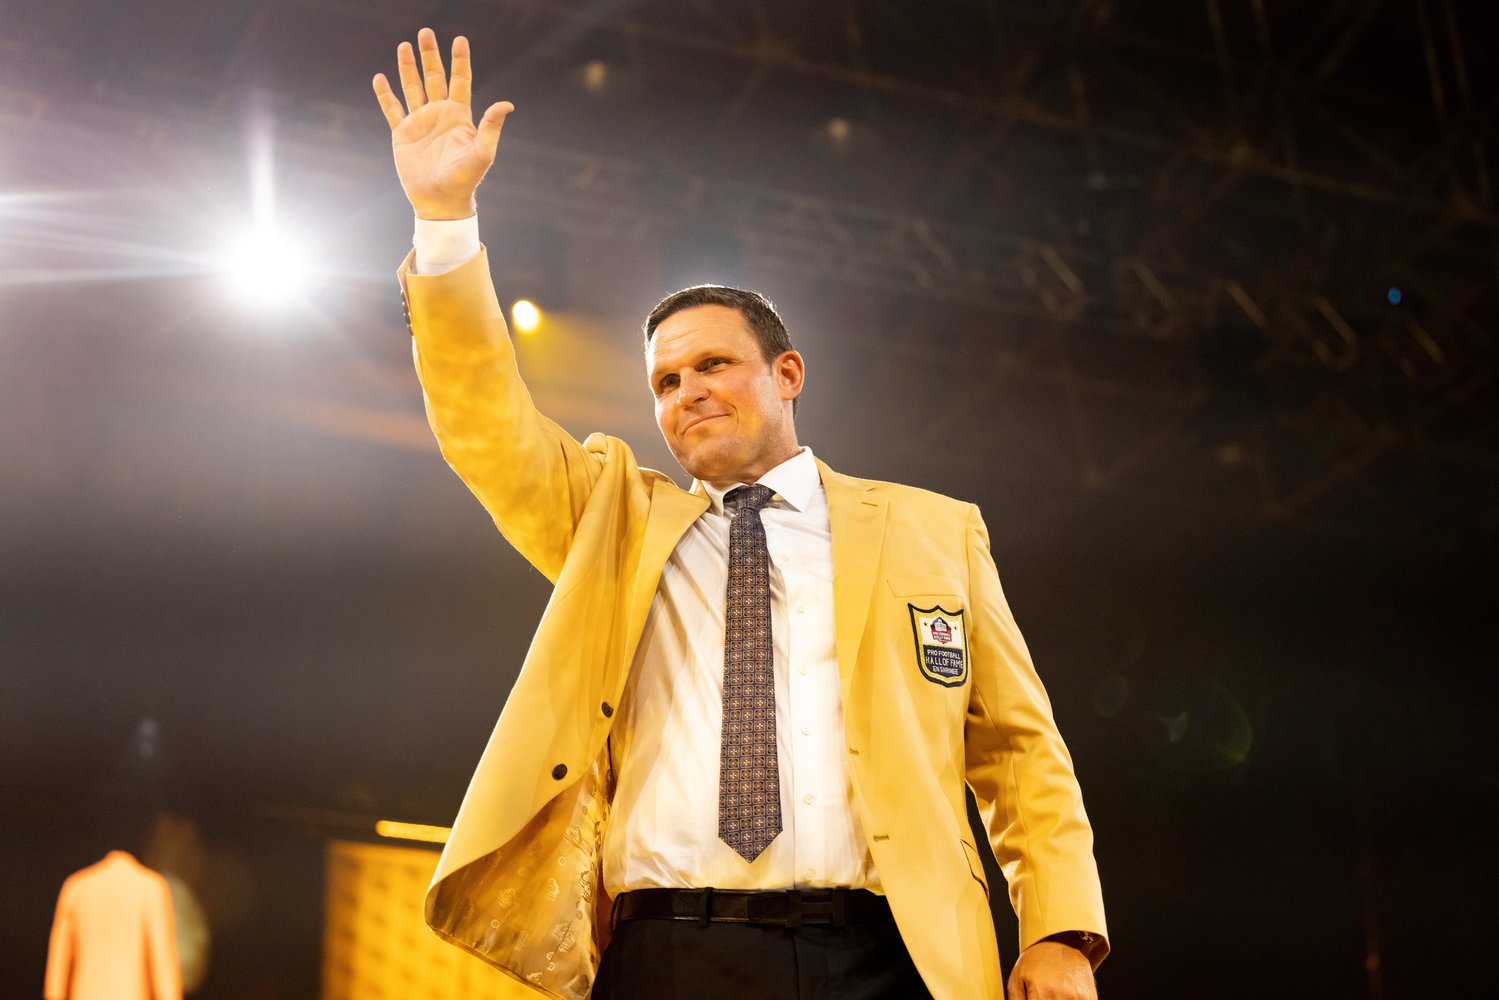 Jacksonville Jaguars legend Tony Boselli will receive the Rock of the Community Award at this year’s Mineral City Celebration gala.